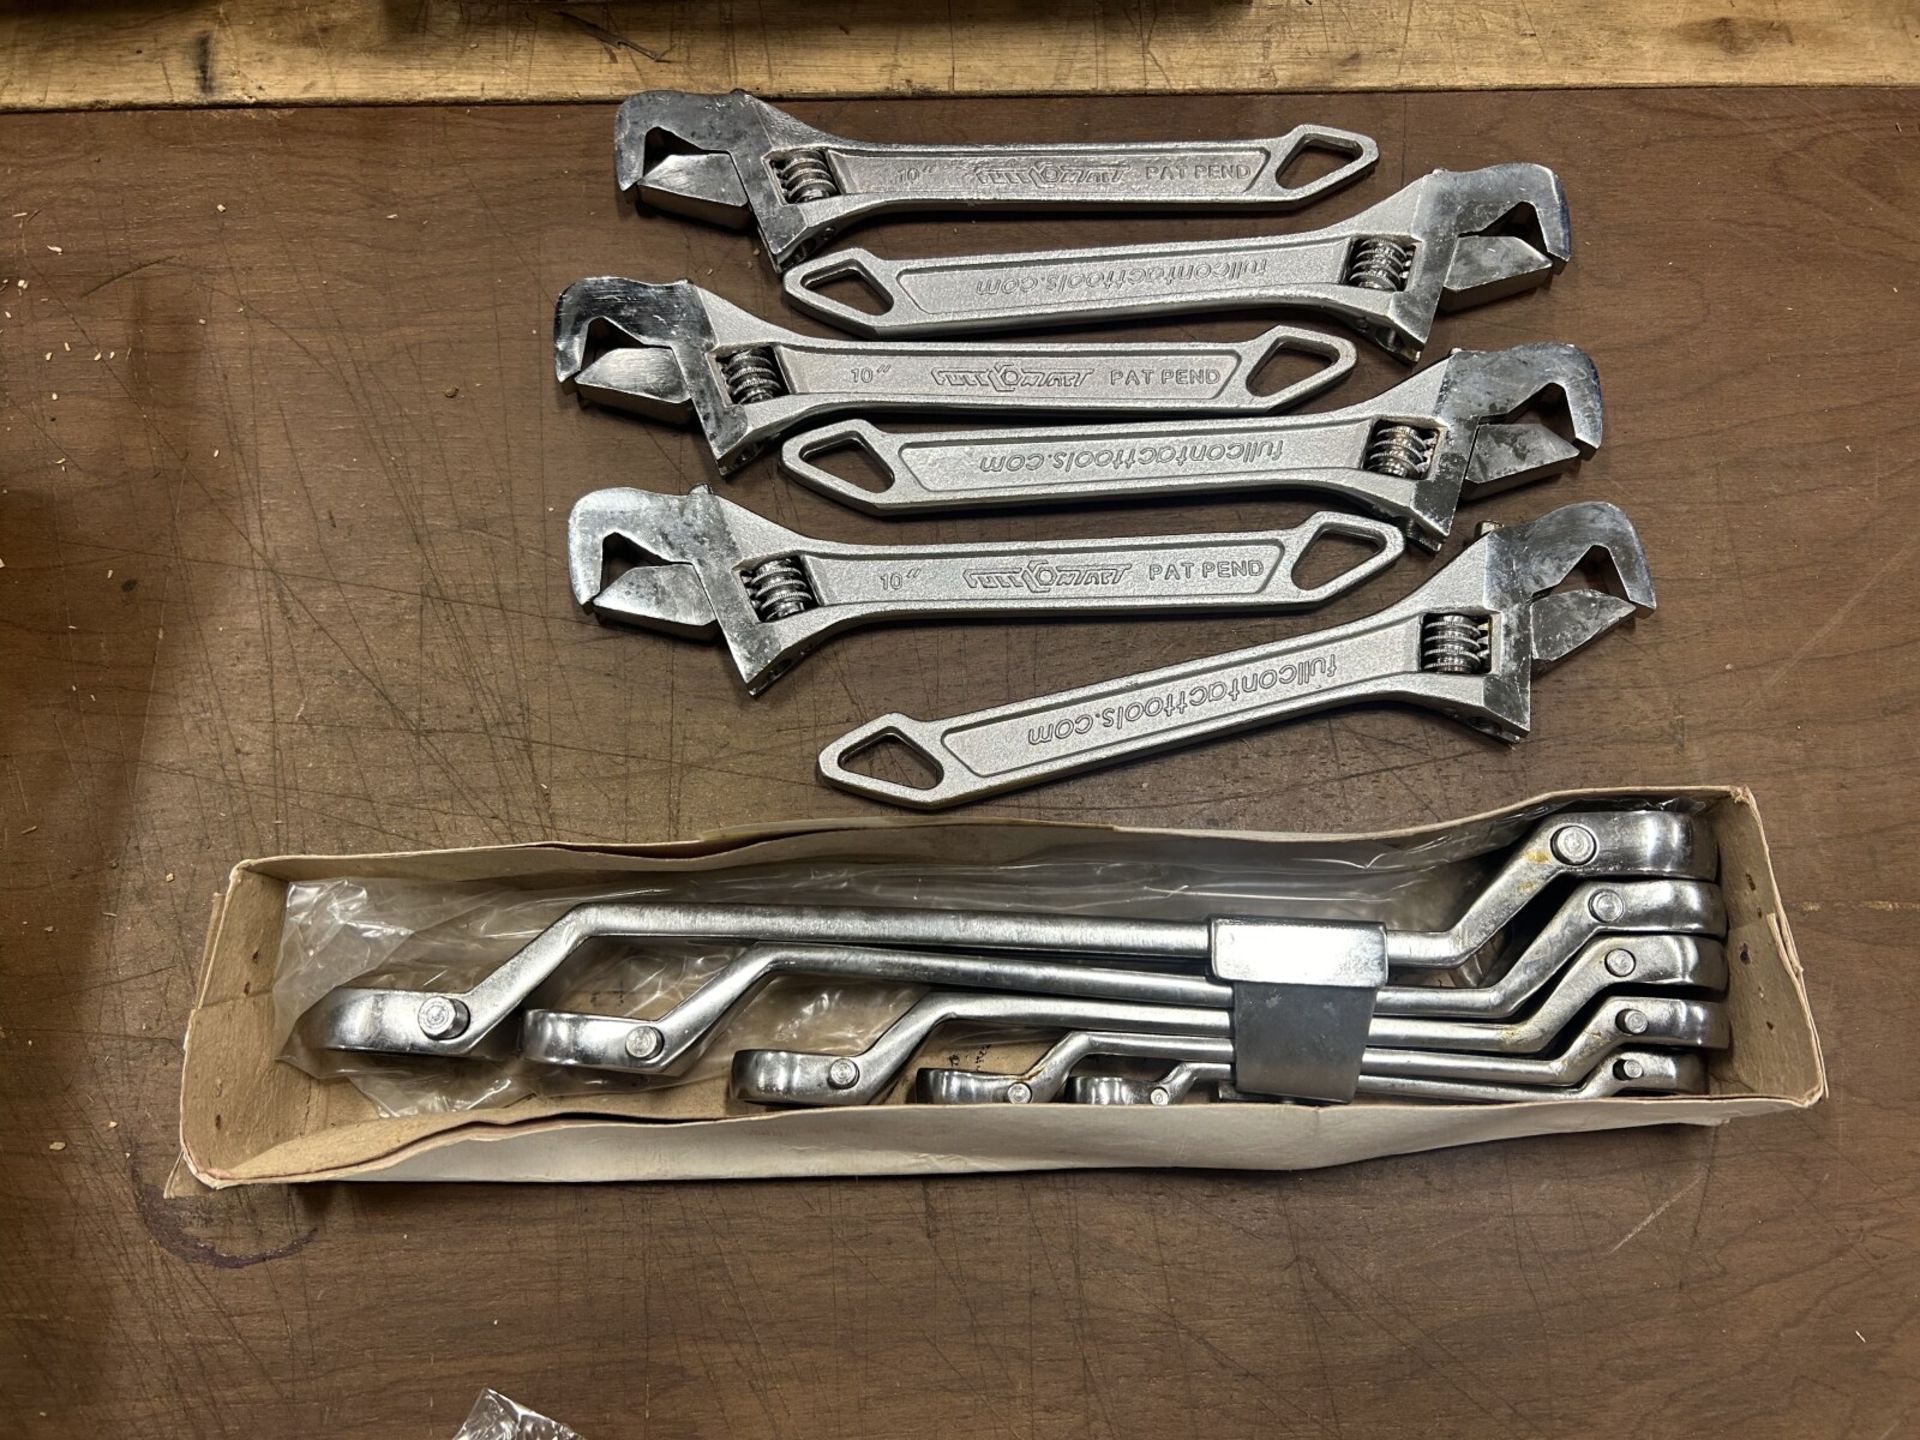 L/O - FULLCONTACT ADJUSTABLE WRENCHES, STANDARD RATCHET WRENCHES